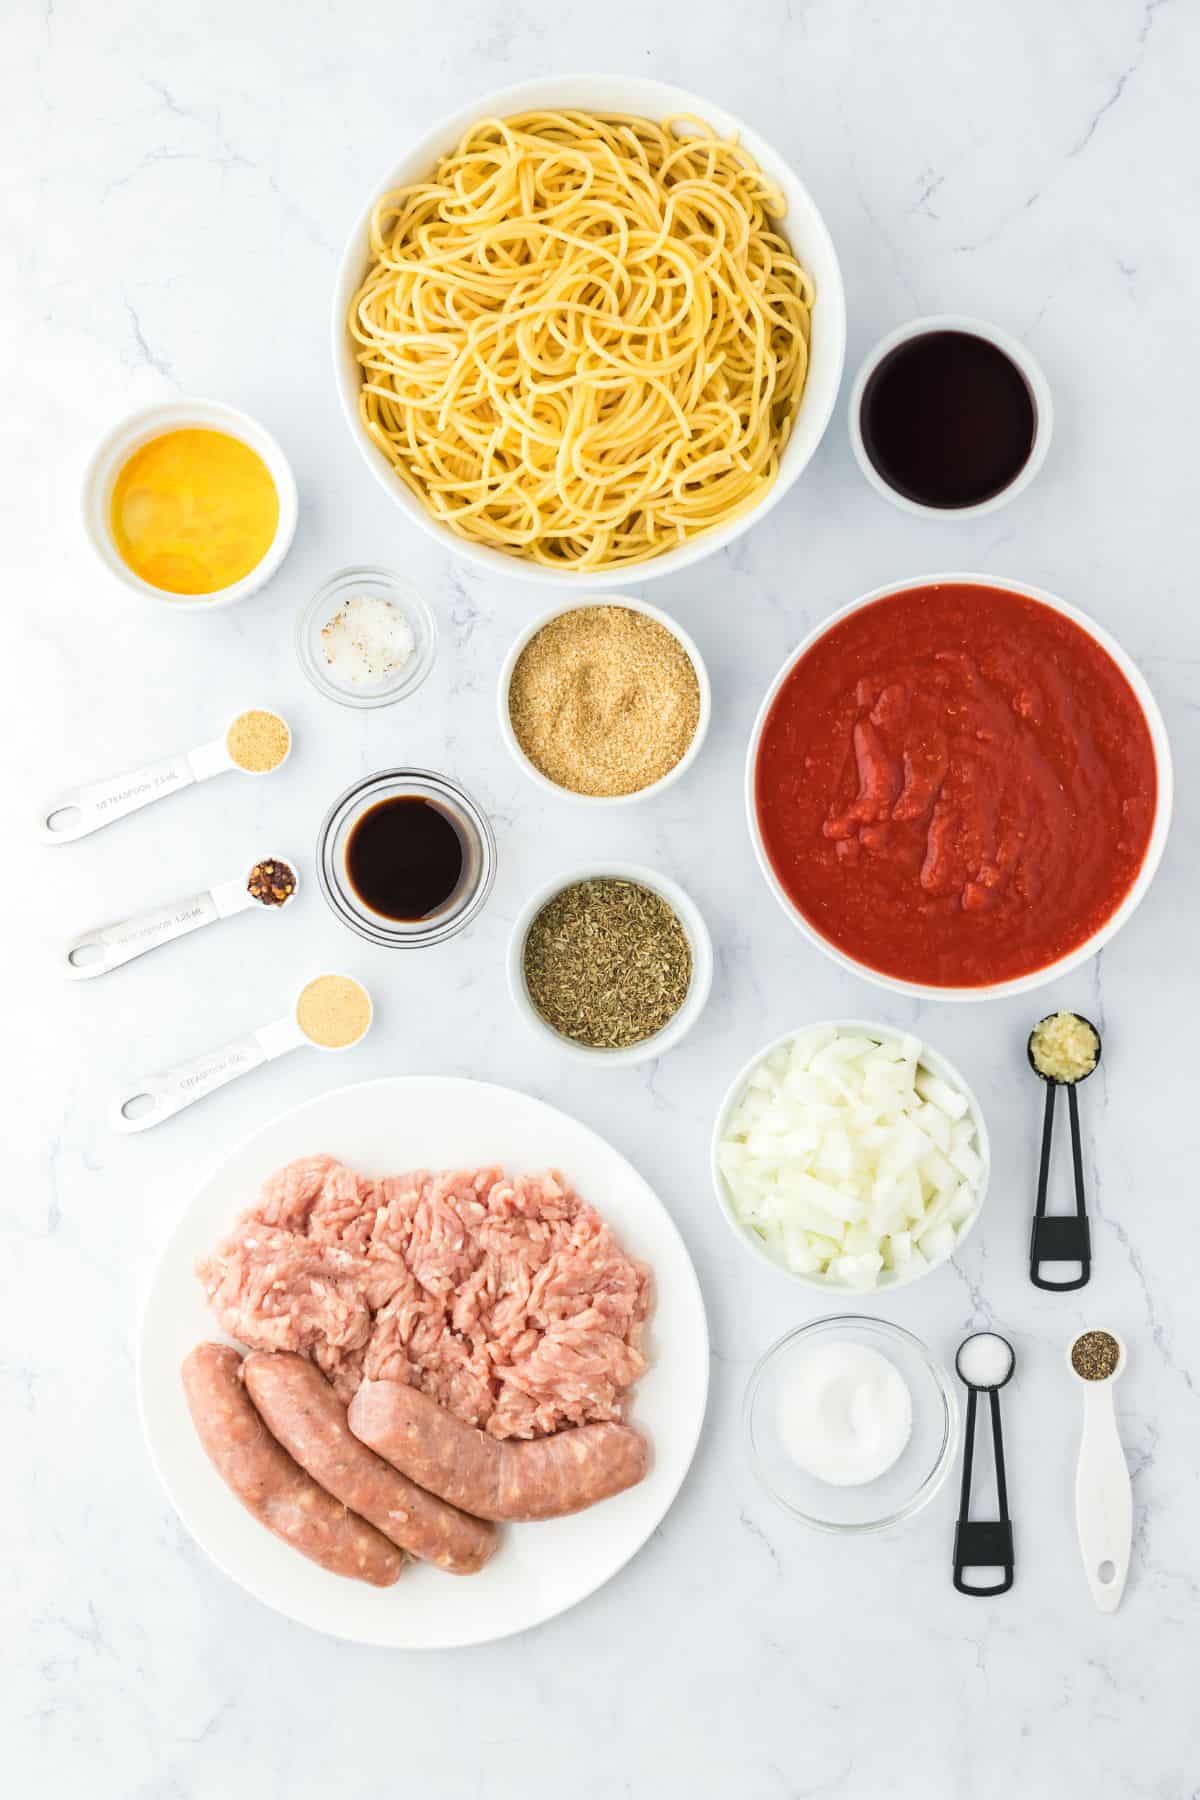 Ingredients to make homemade spaghetti and meatballs on the table.